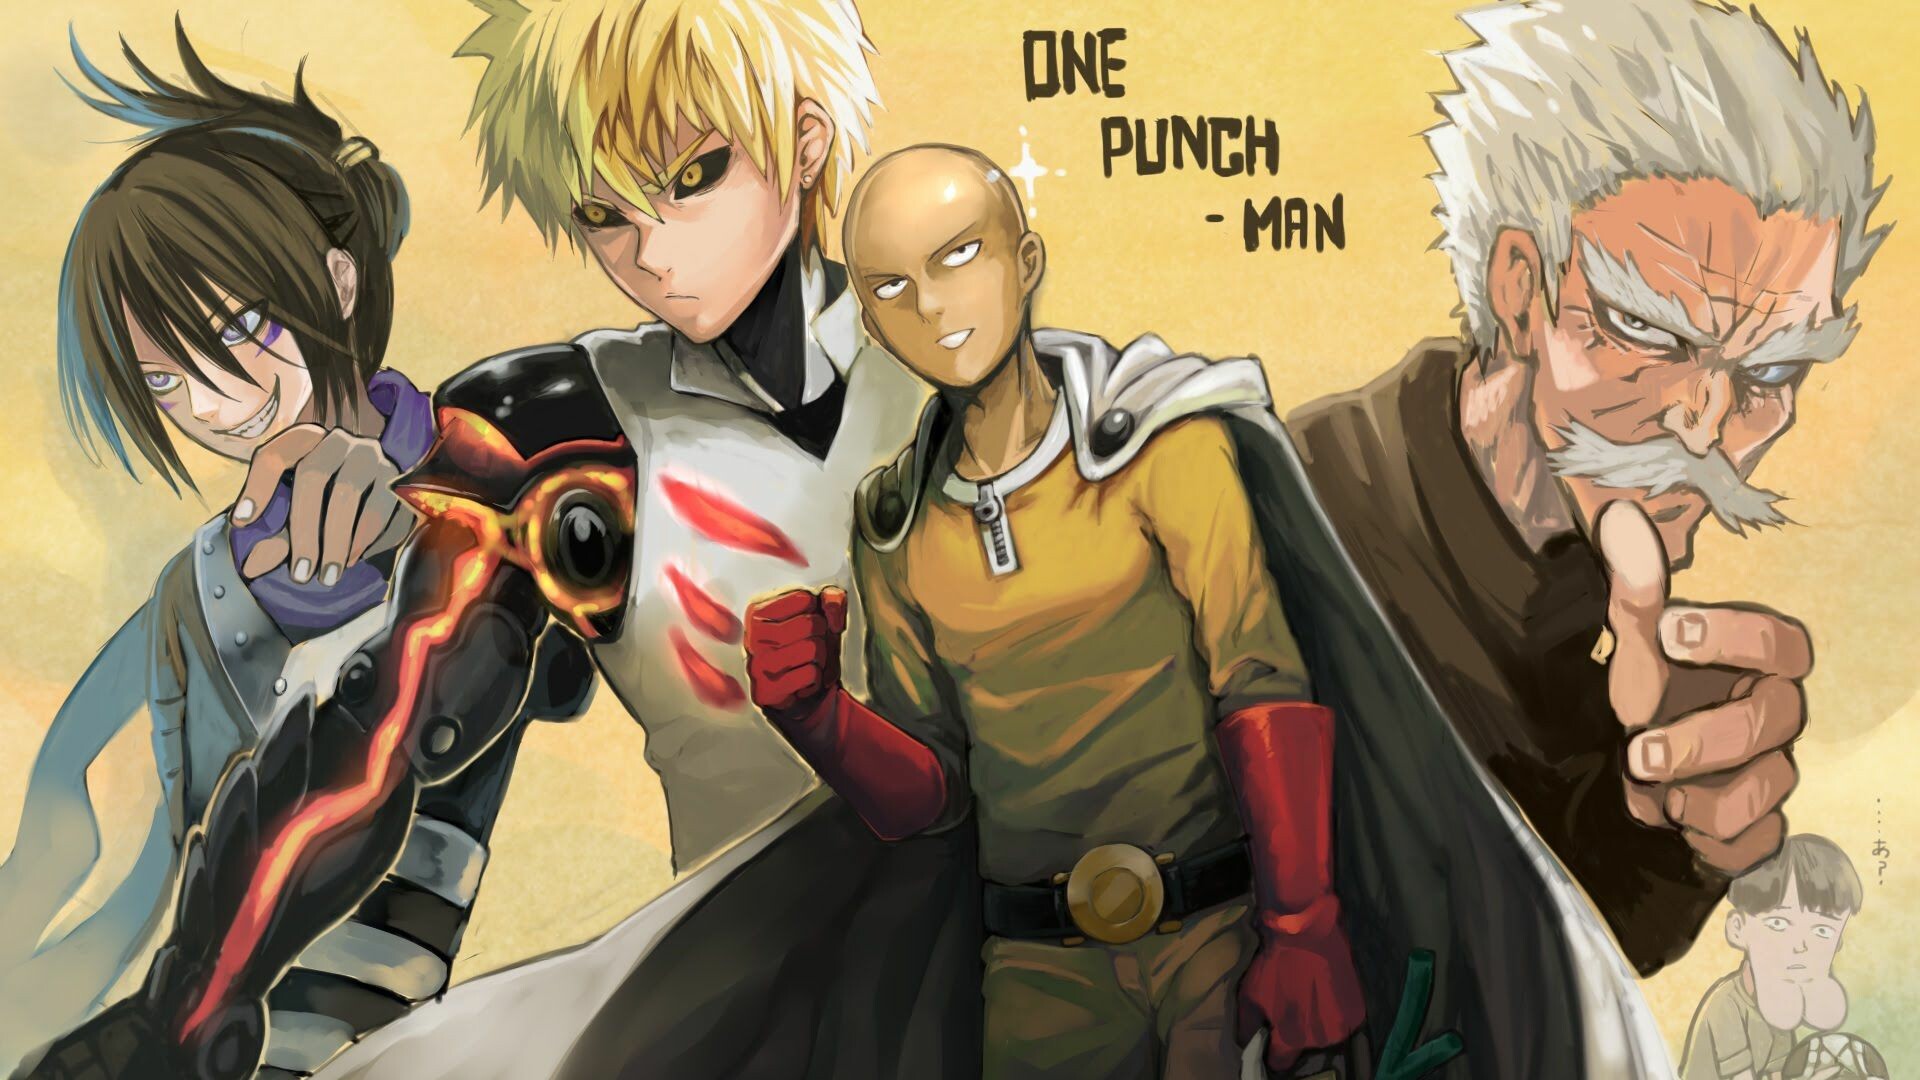 One-Punch Man, HD wallpapers, Free download, PC and laptop, 1920x1080 Full HD Desktop